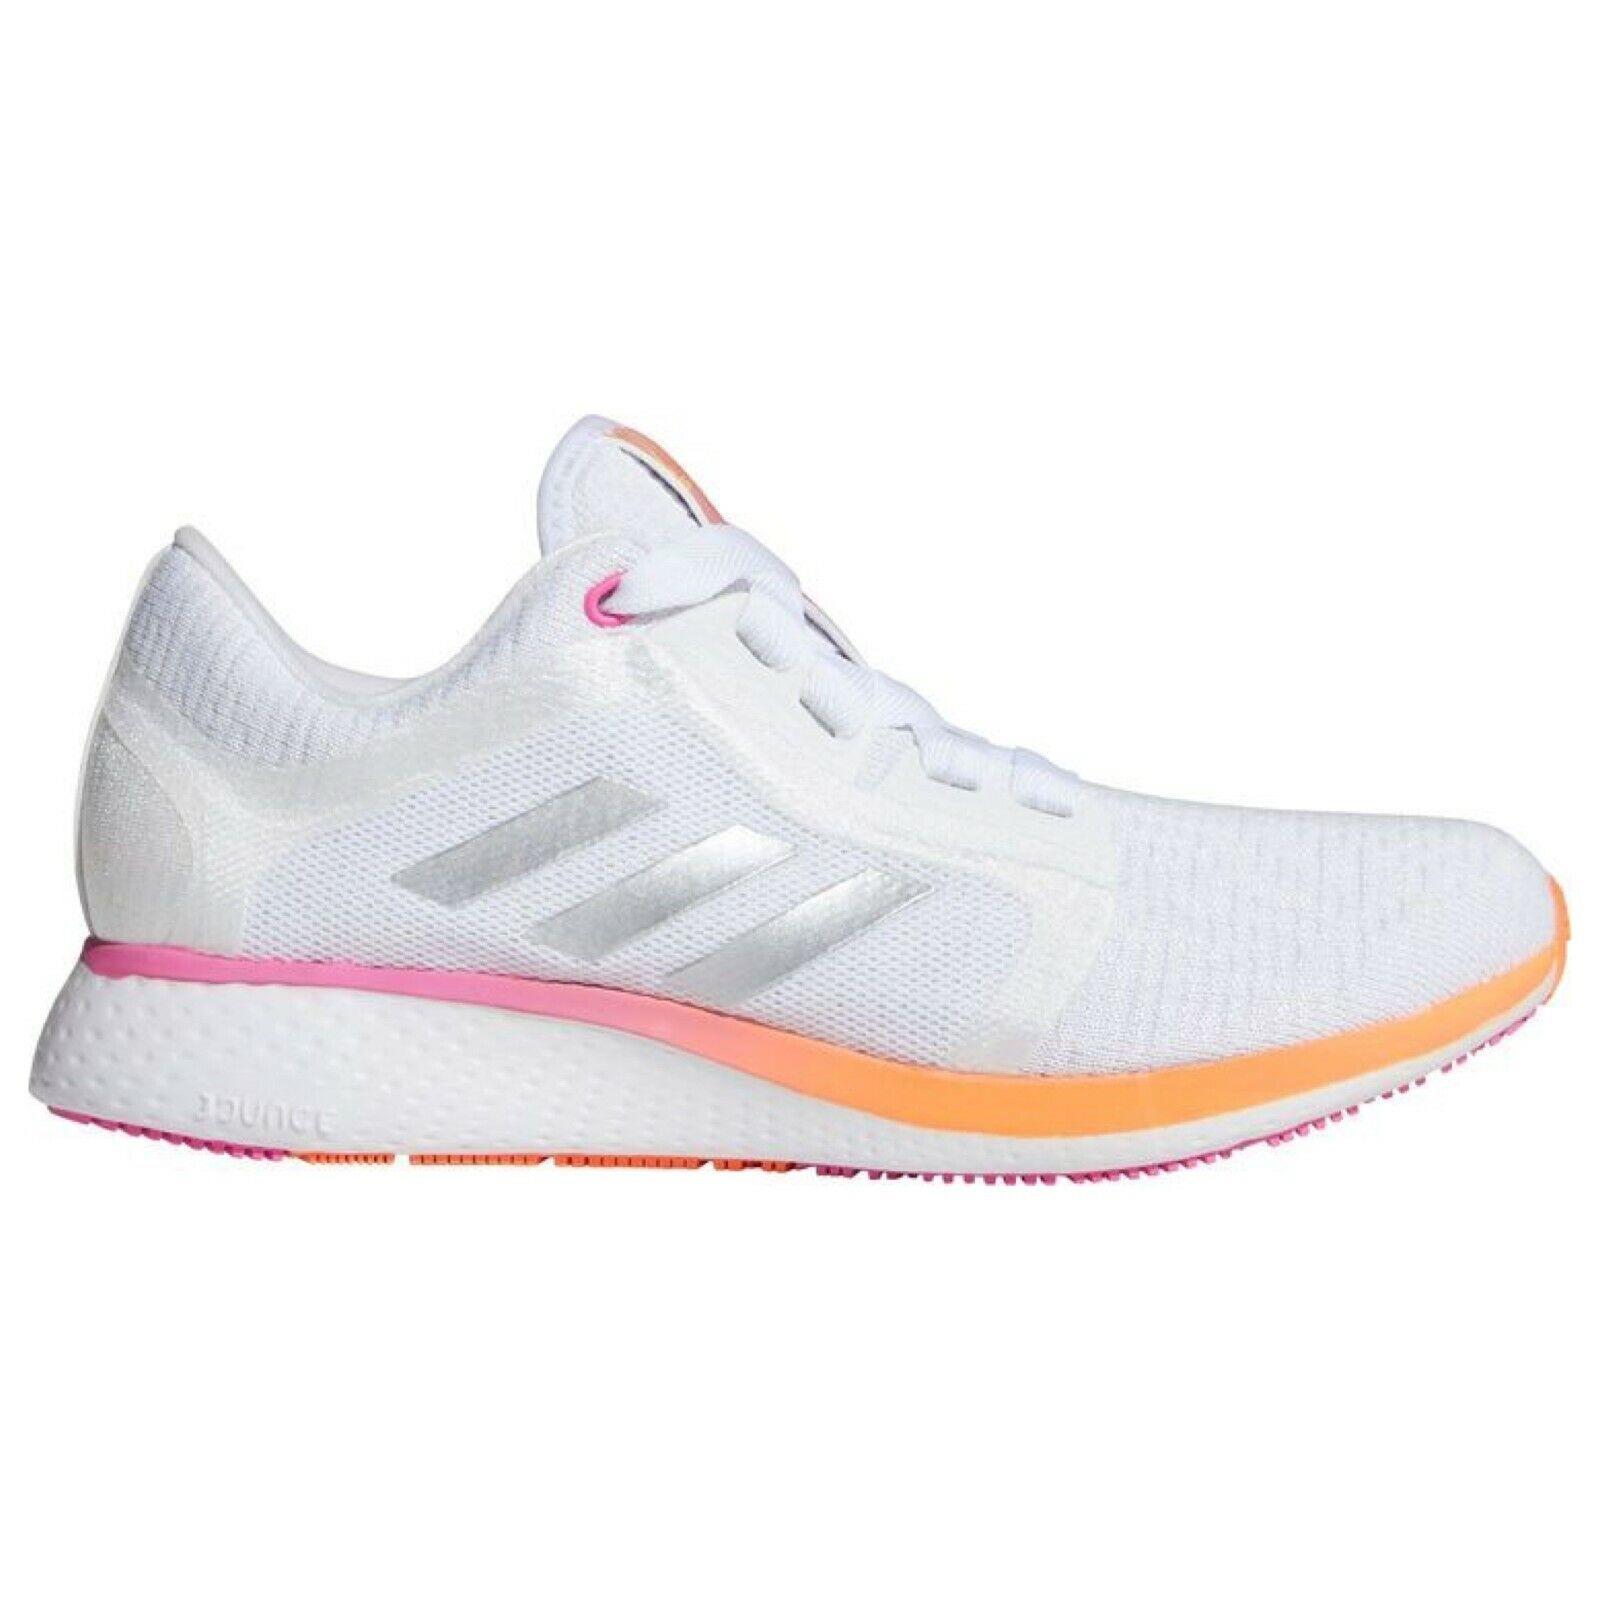 Adidas shoes Edge Lux - White , WHITE/PINK/YELLOW Manufacturer 0